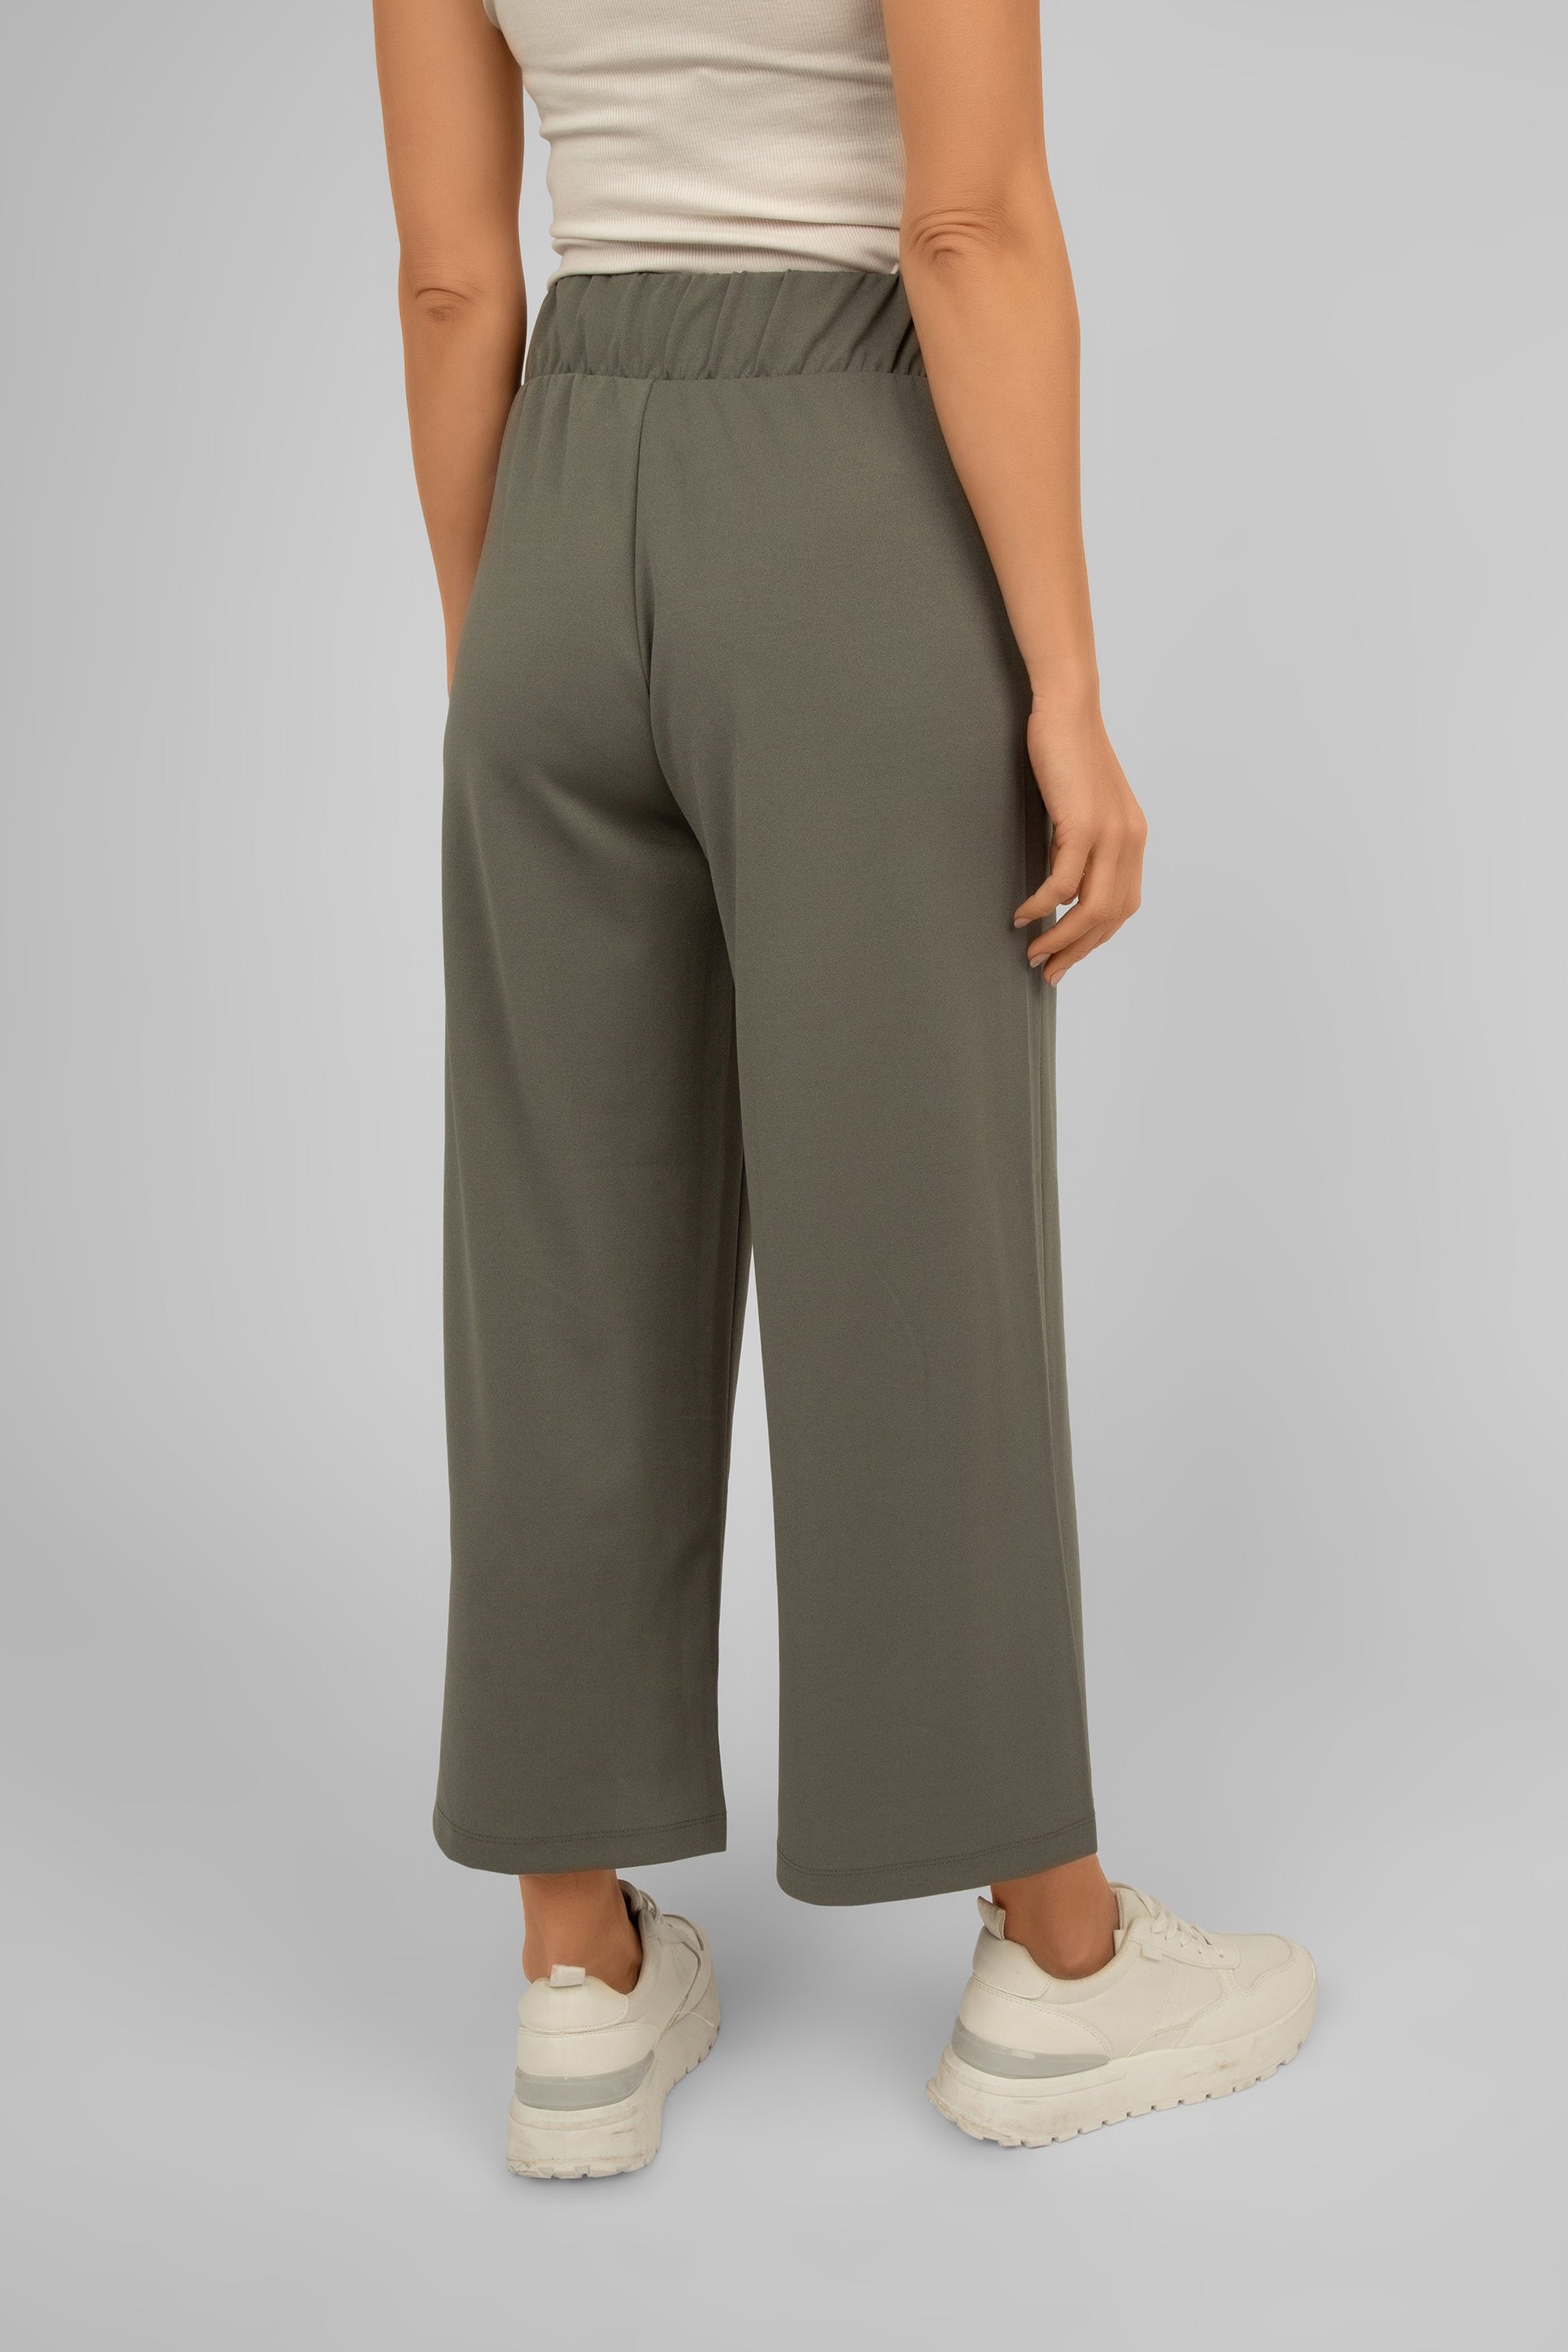 Back view of Soya Concept (25330) Women's Pull On Wide Leg Cropped Pants in Misty Green